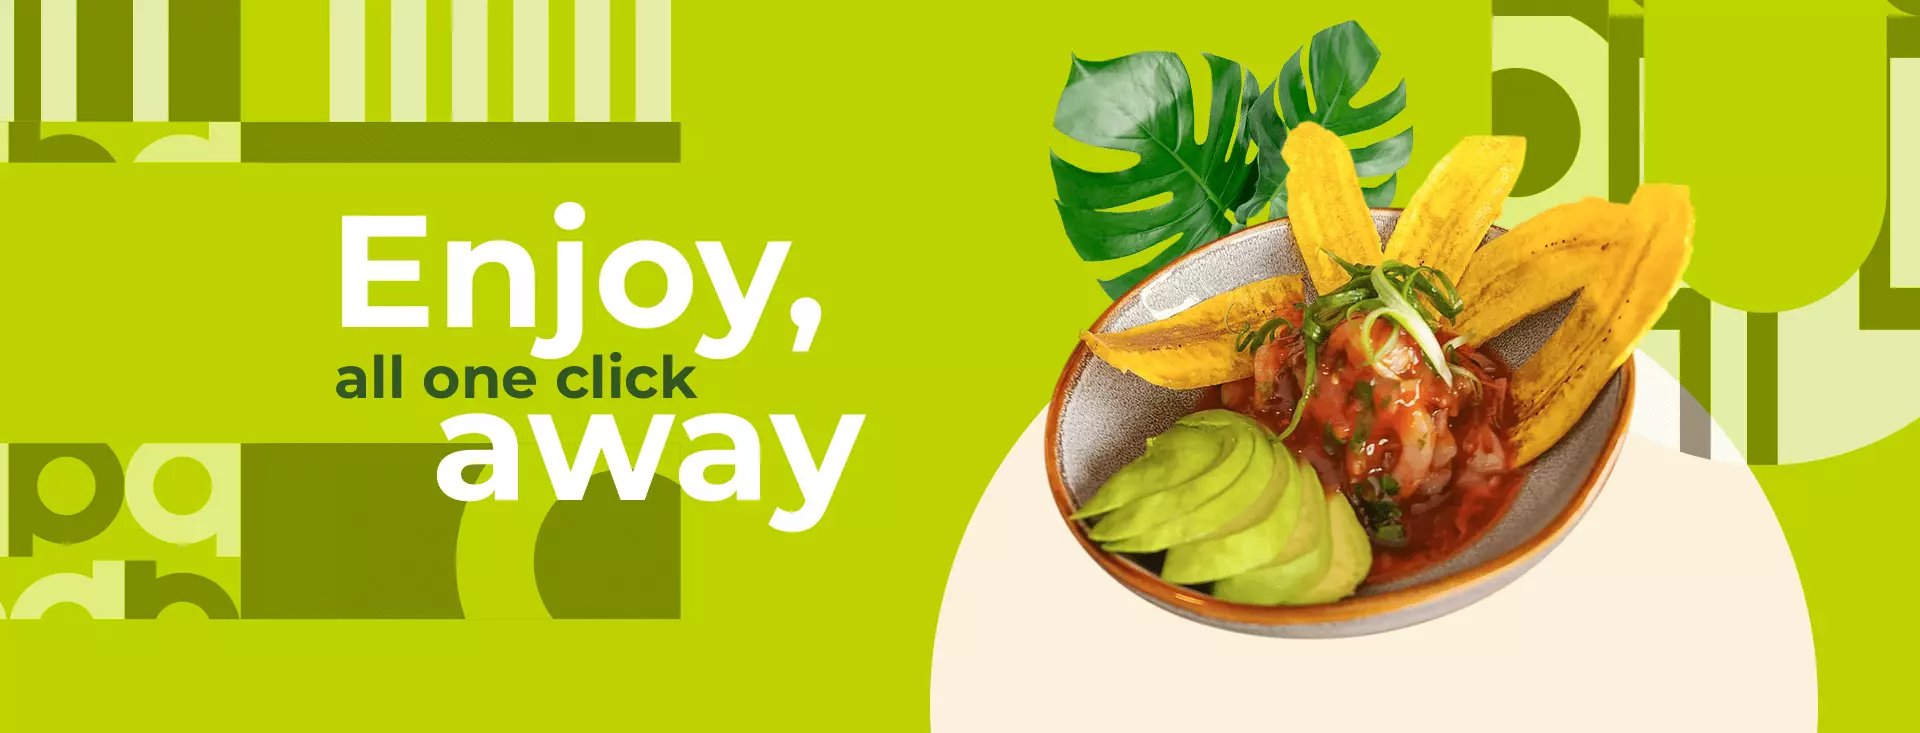 Inca paisa restaurant online order banner with ceviche dish”